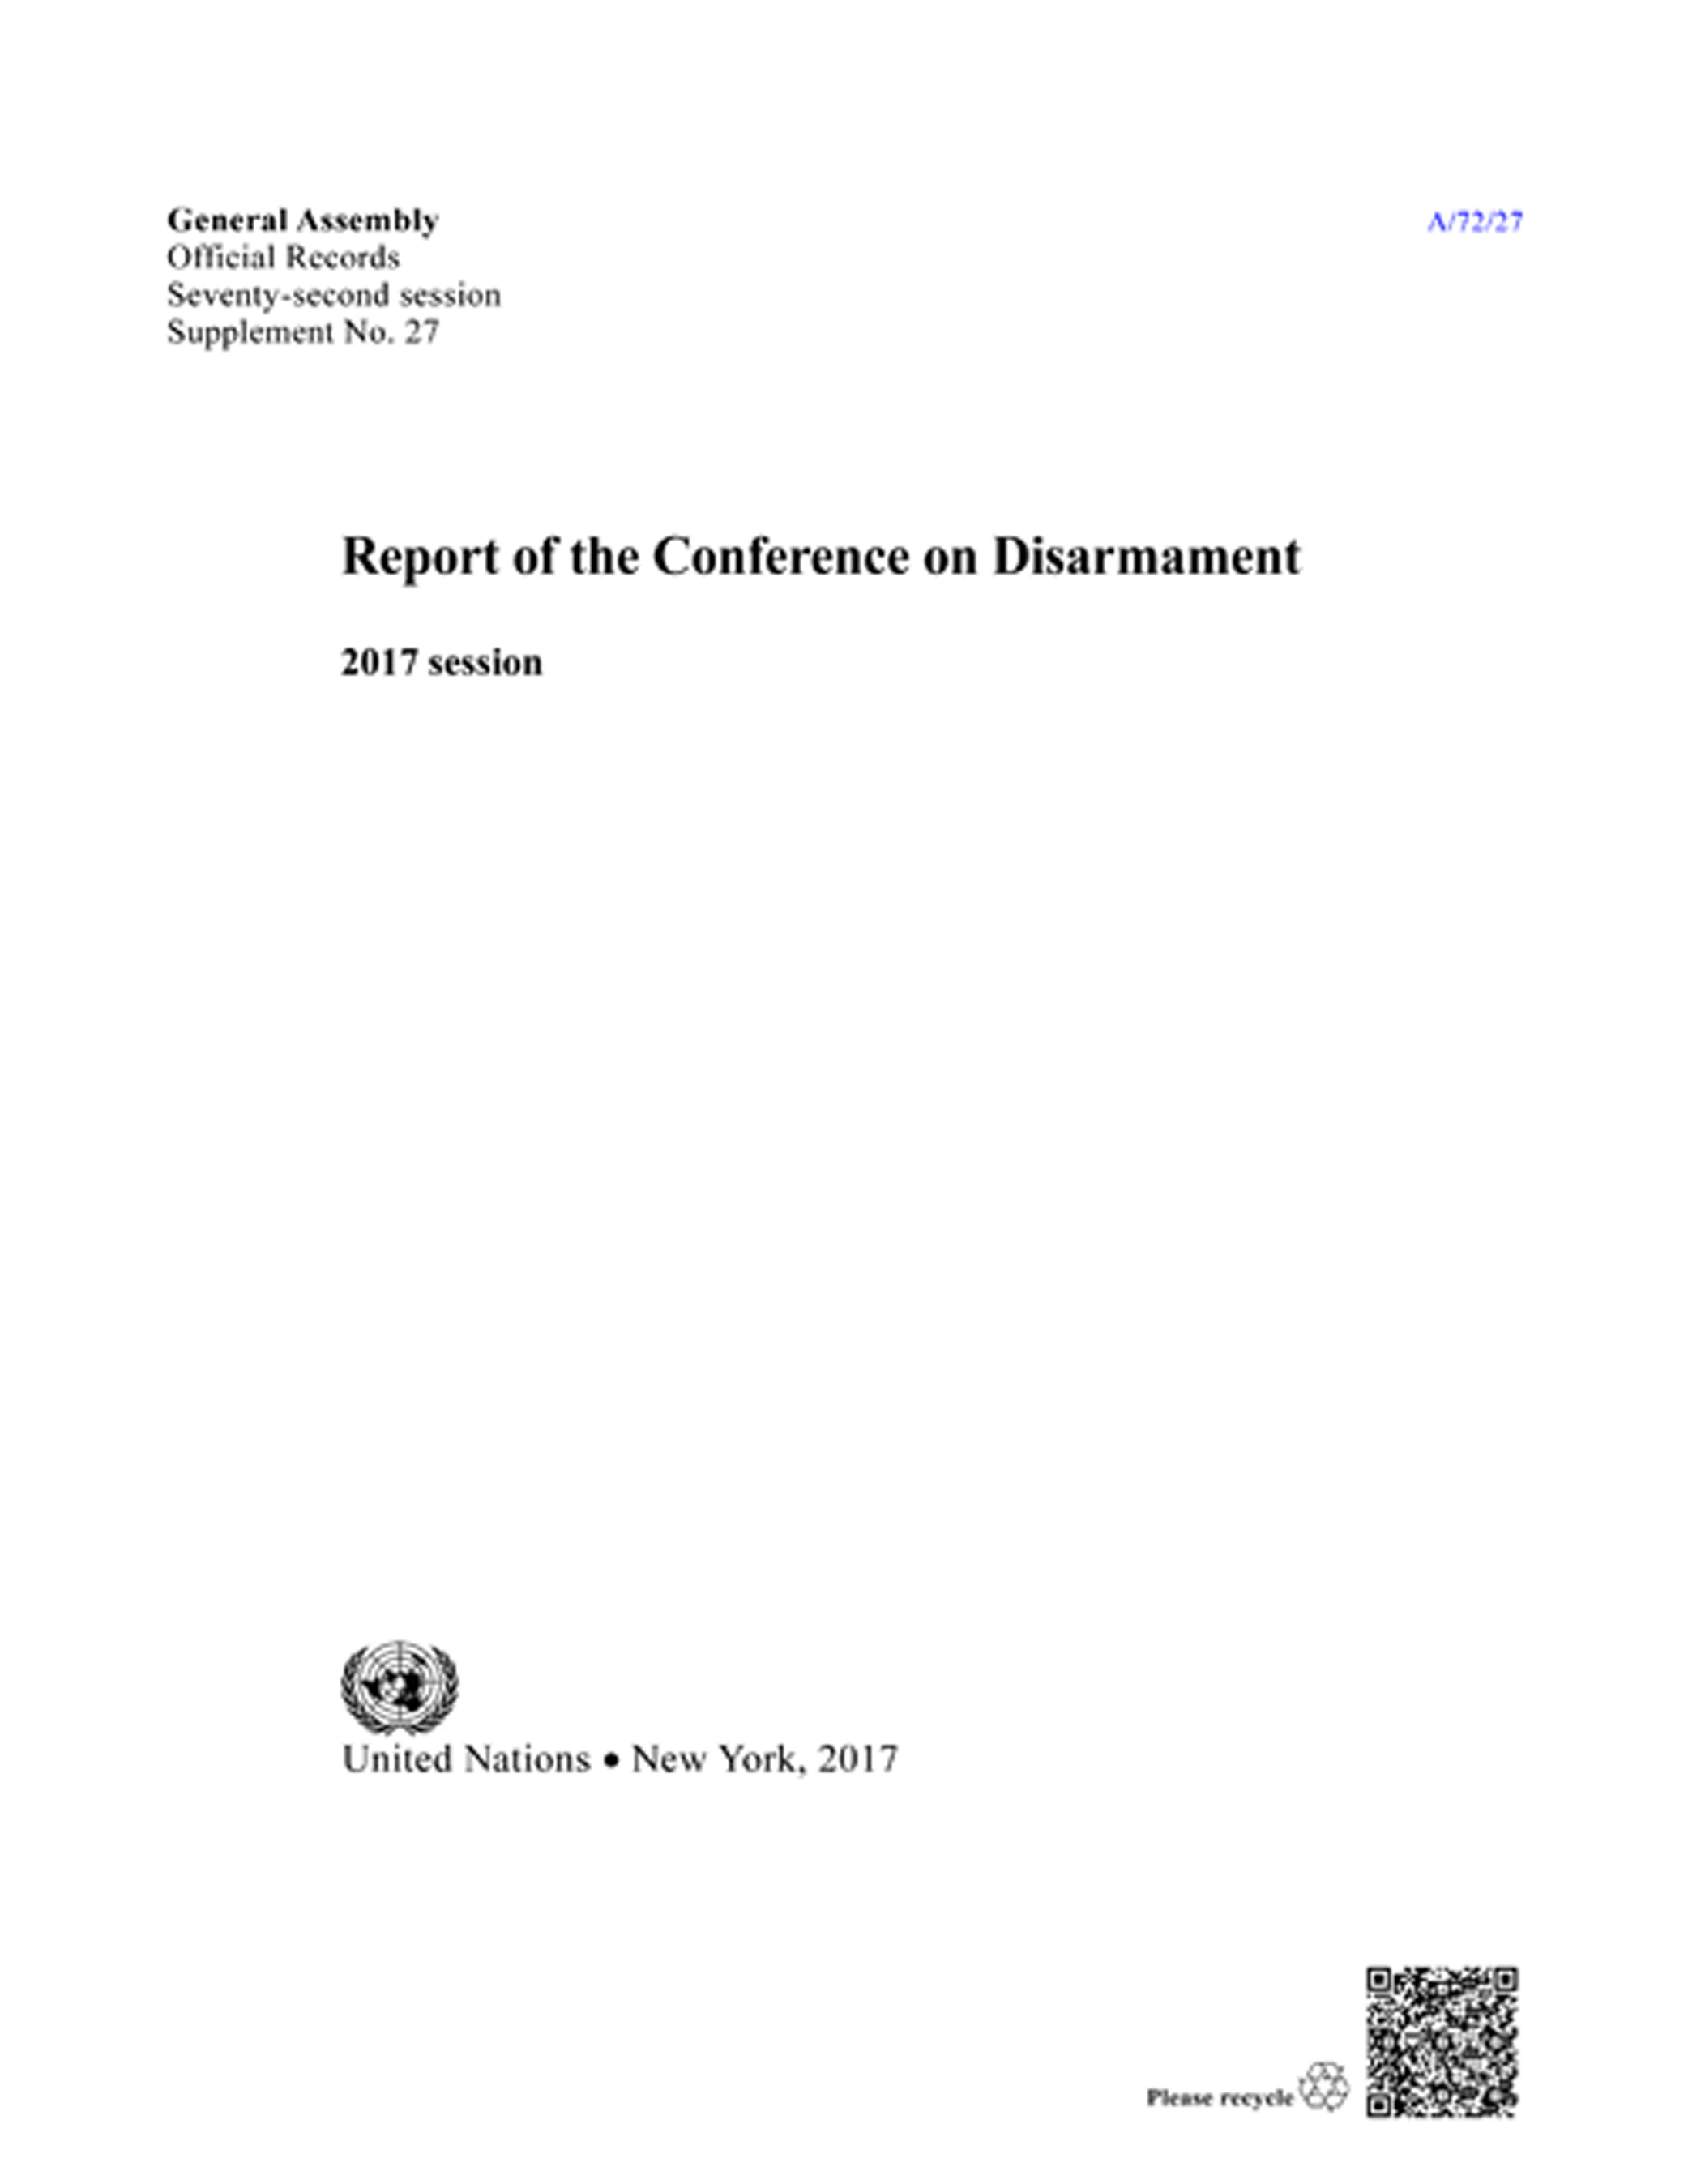 image of Report of the Conference on Disarmament: 2017 Session